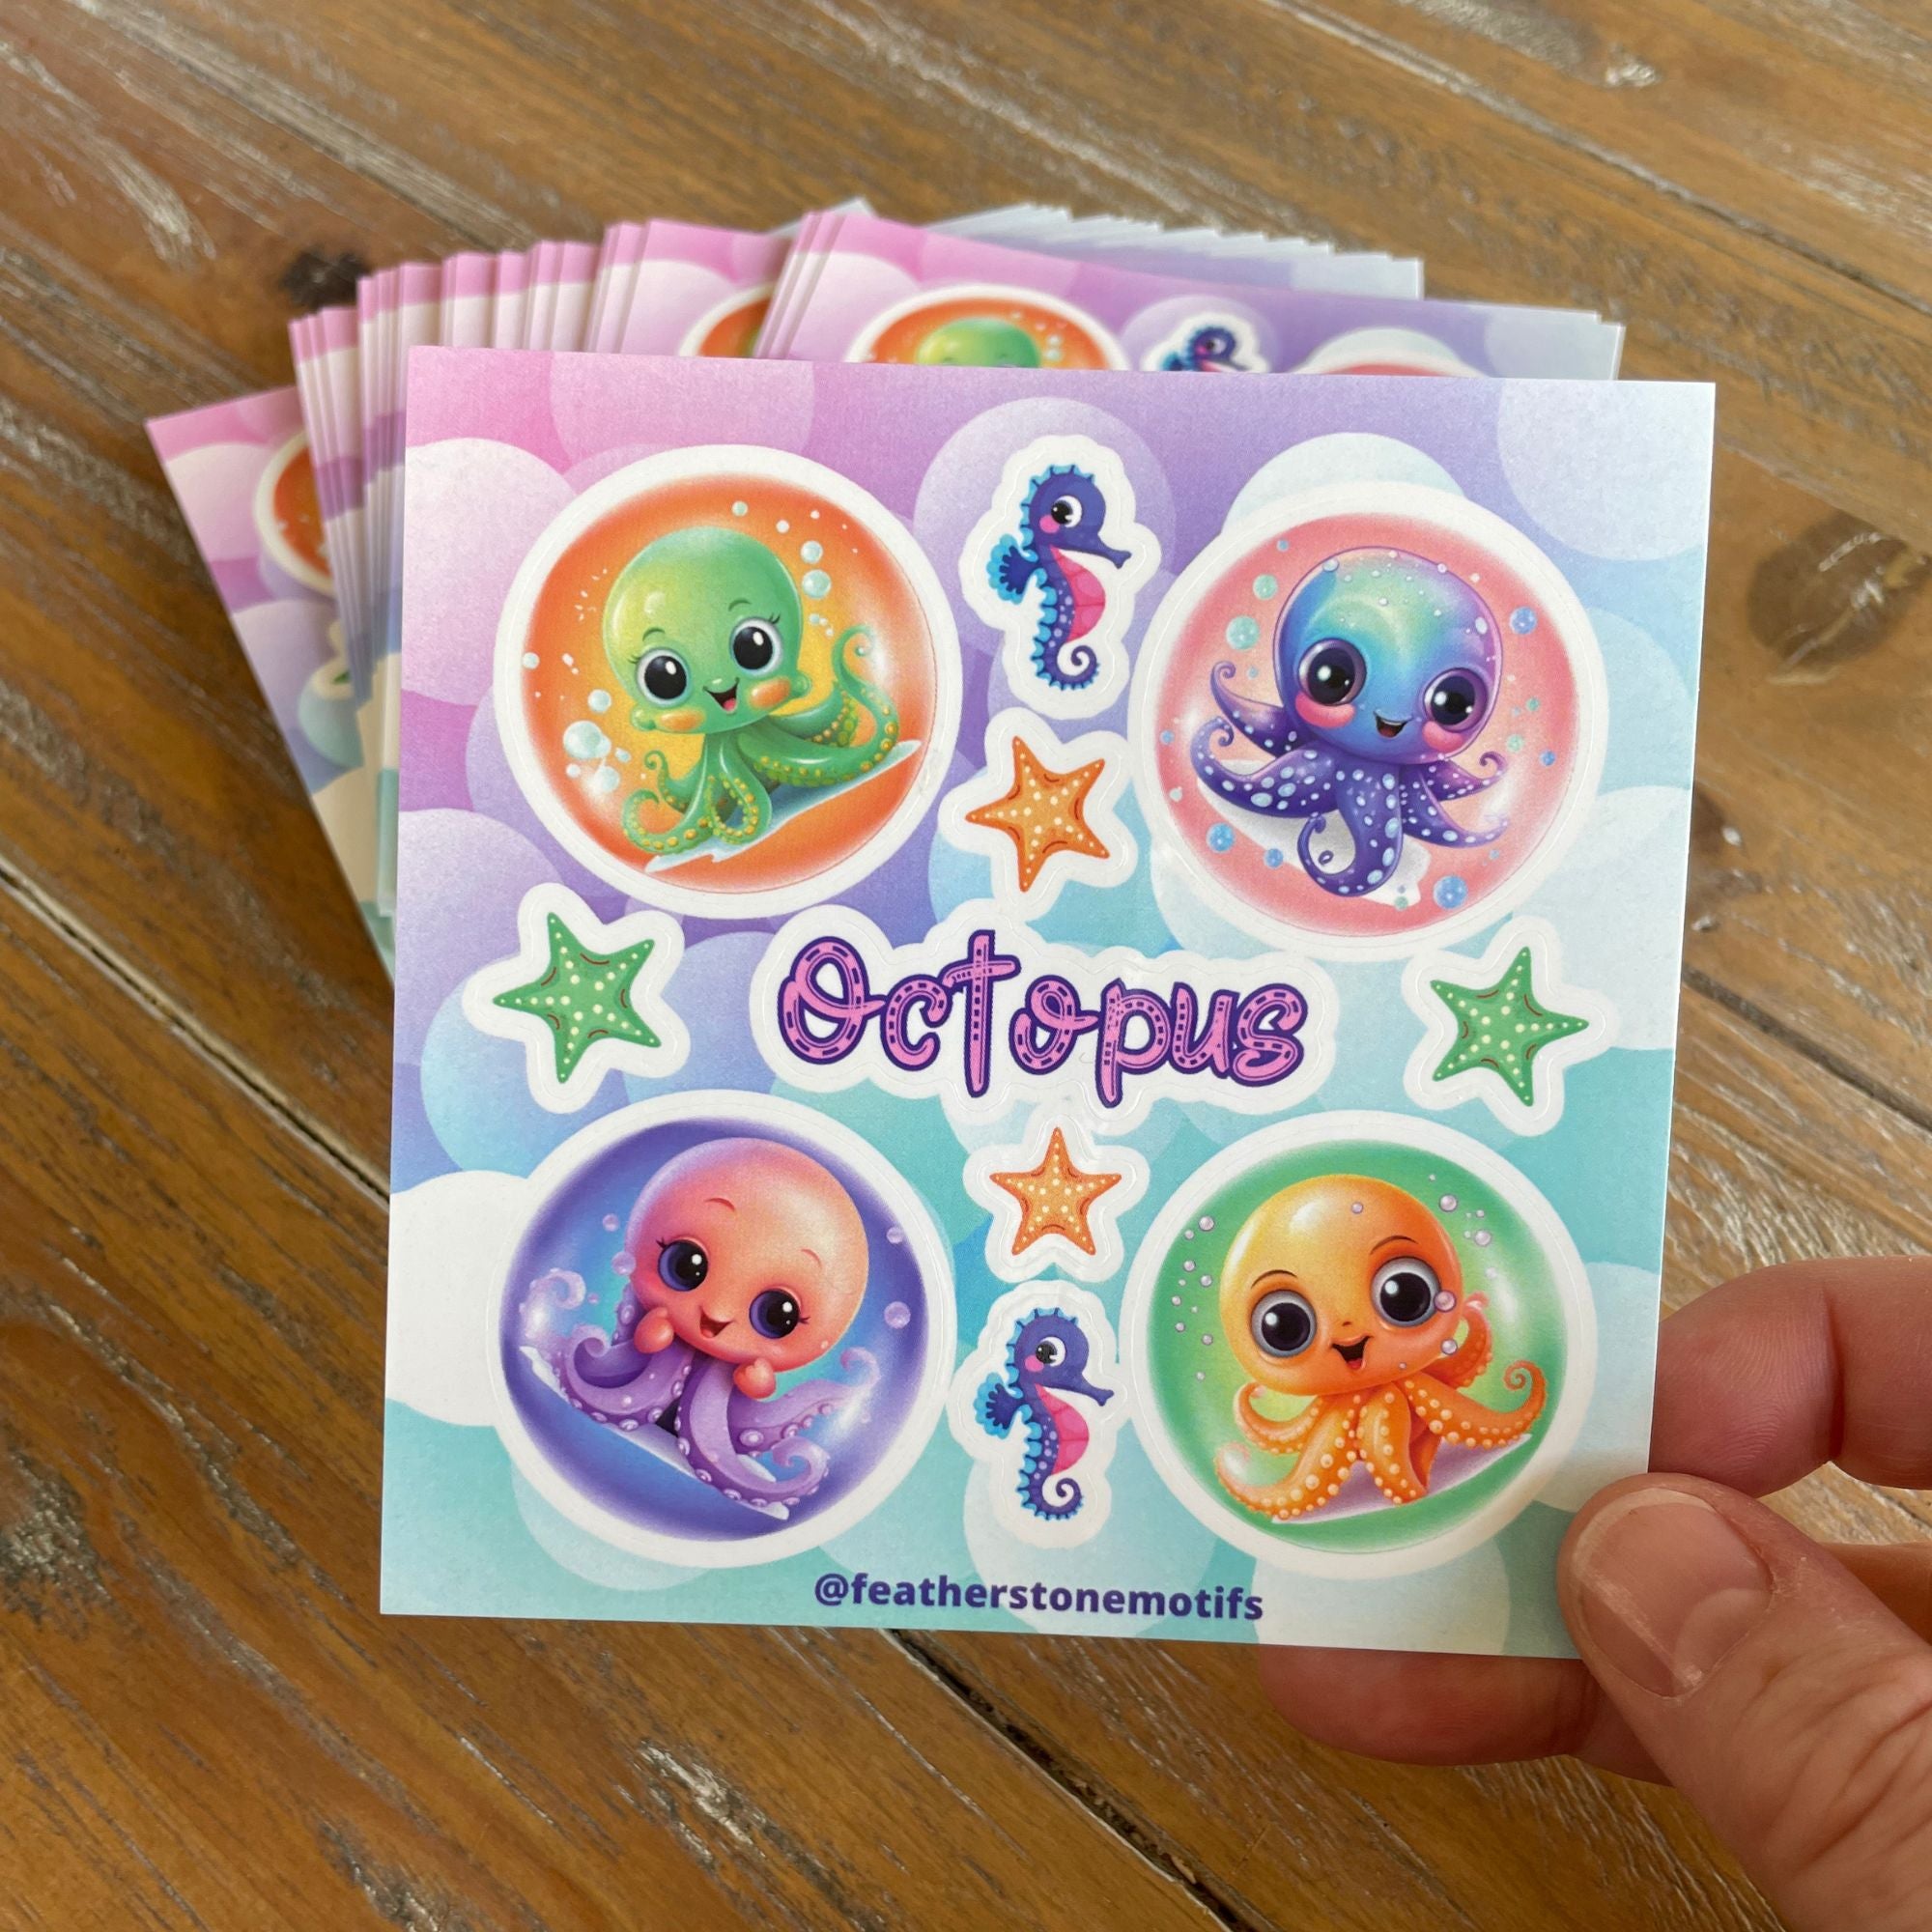 This image shows the Octopus mini sheet